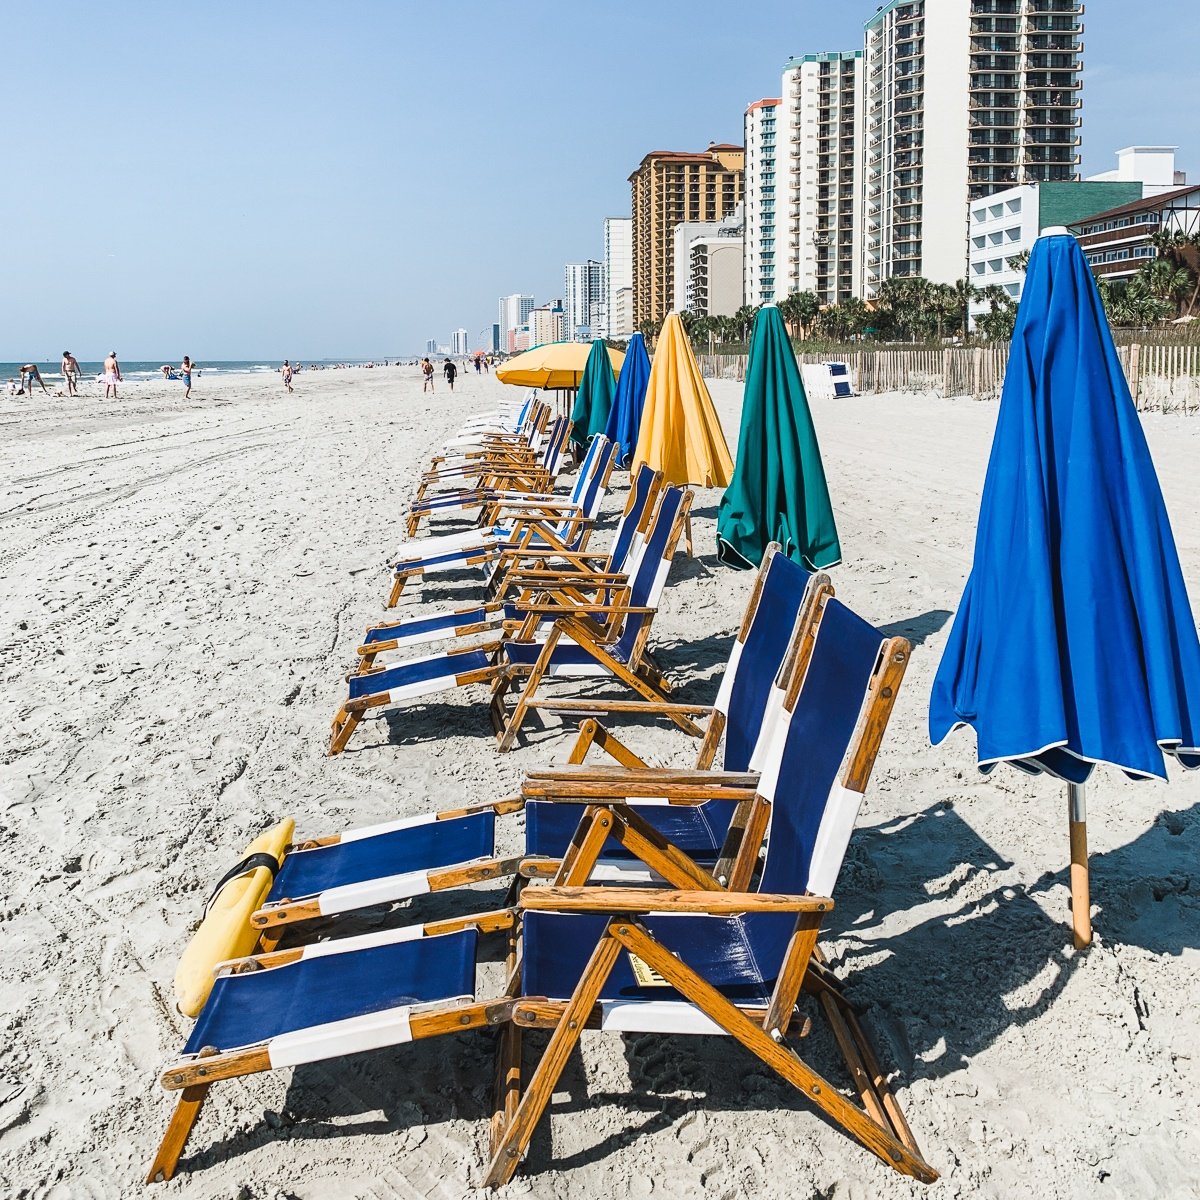 11 Things to Do in Myrtle Beach for Fun-Loving Adults